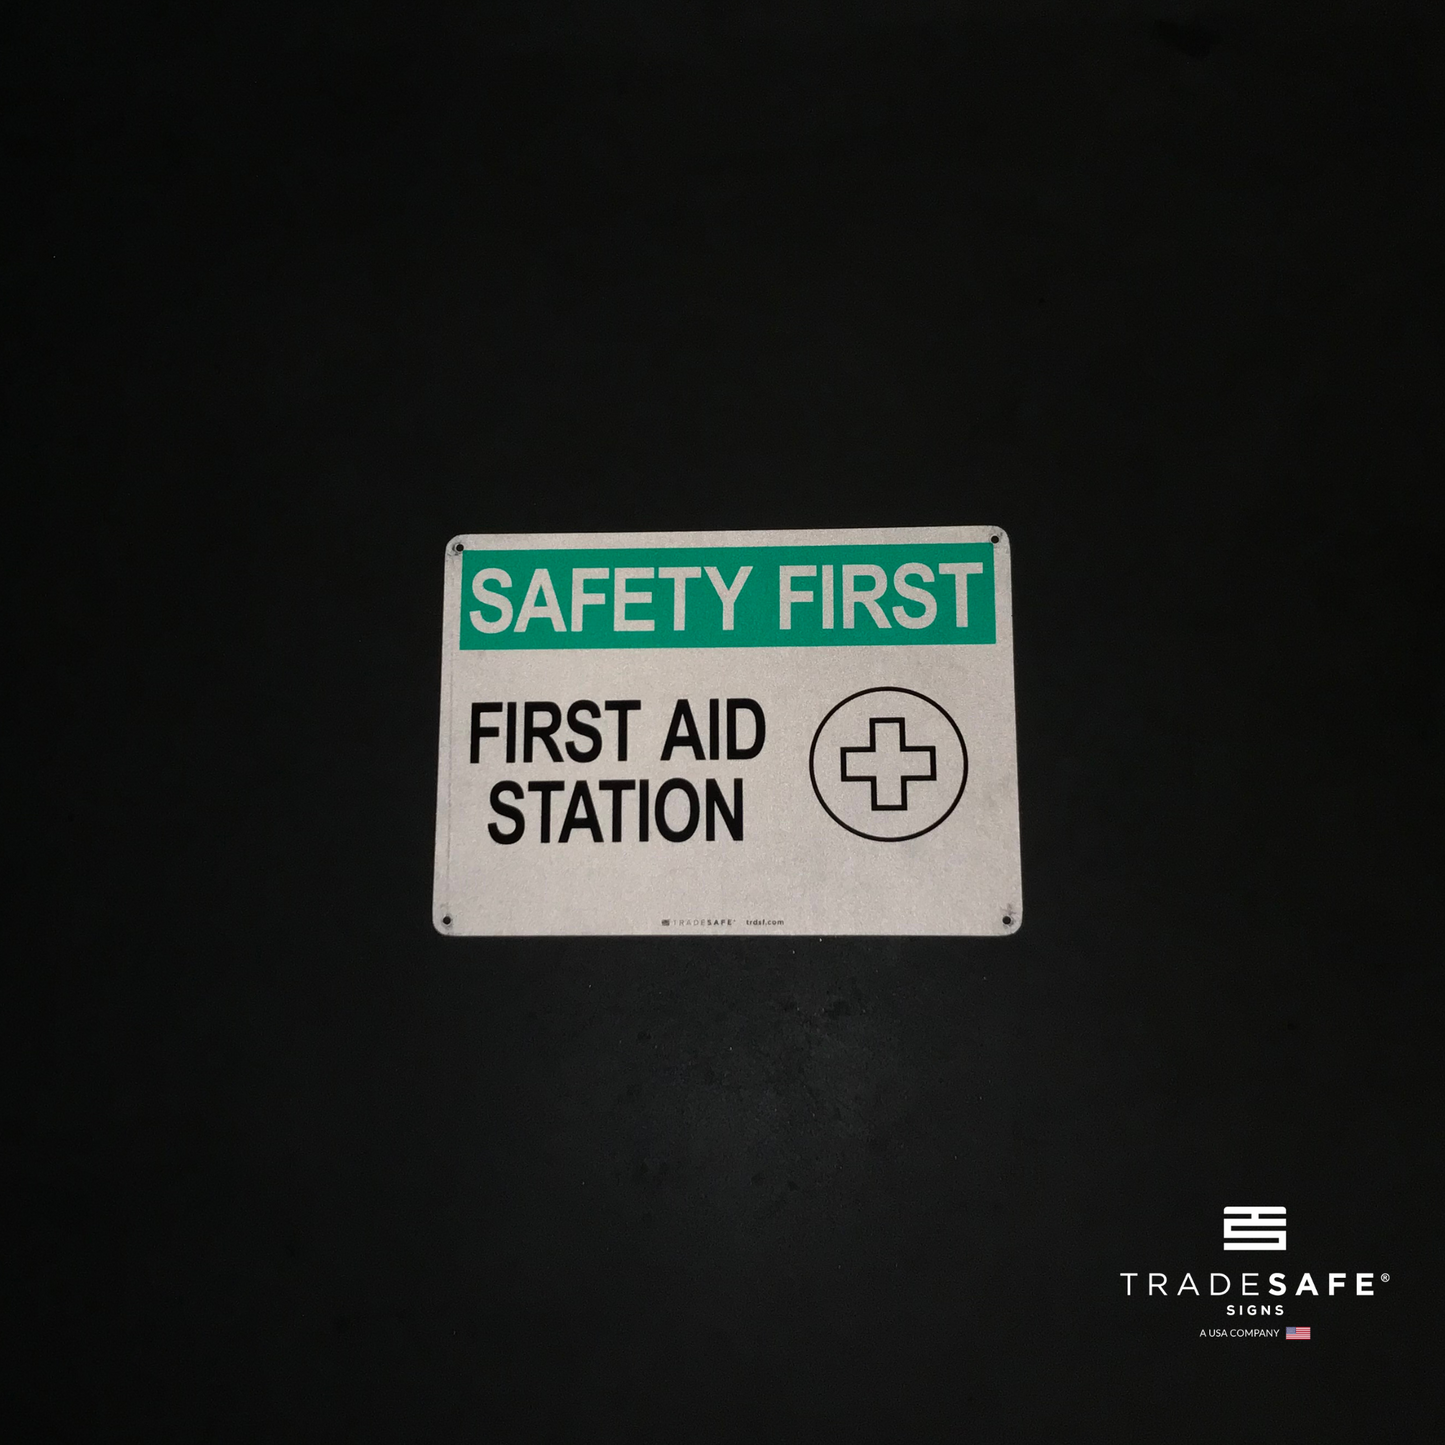 reflective attribute of safety first sign on black background